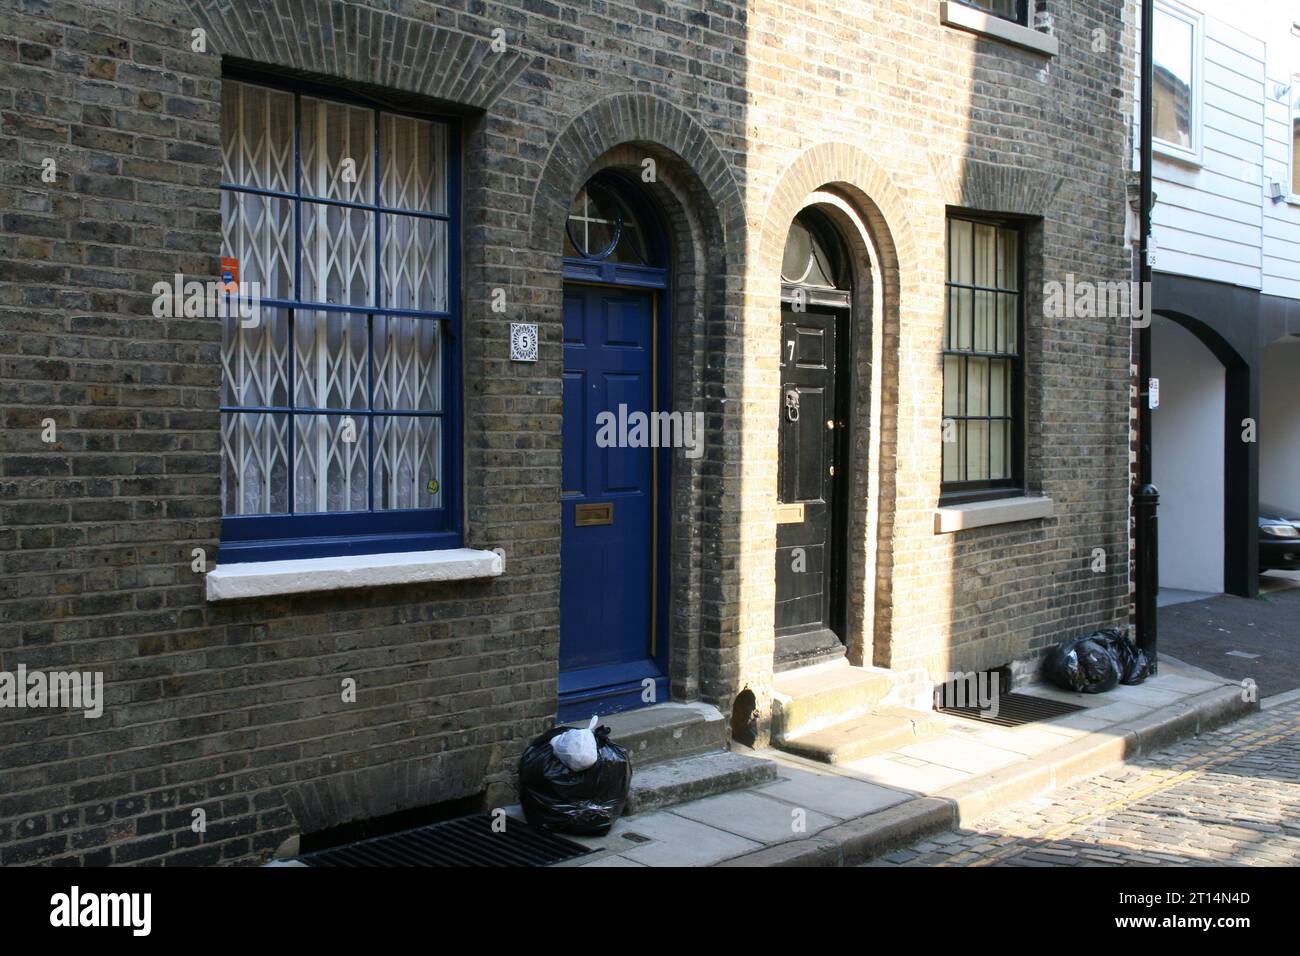 A facade of a modern building with a bright blue door and large windows in London, UK. Stock Photo